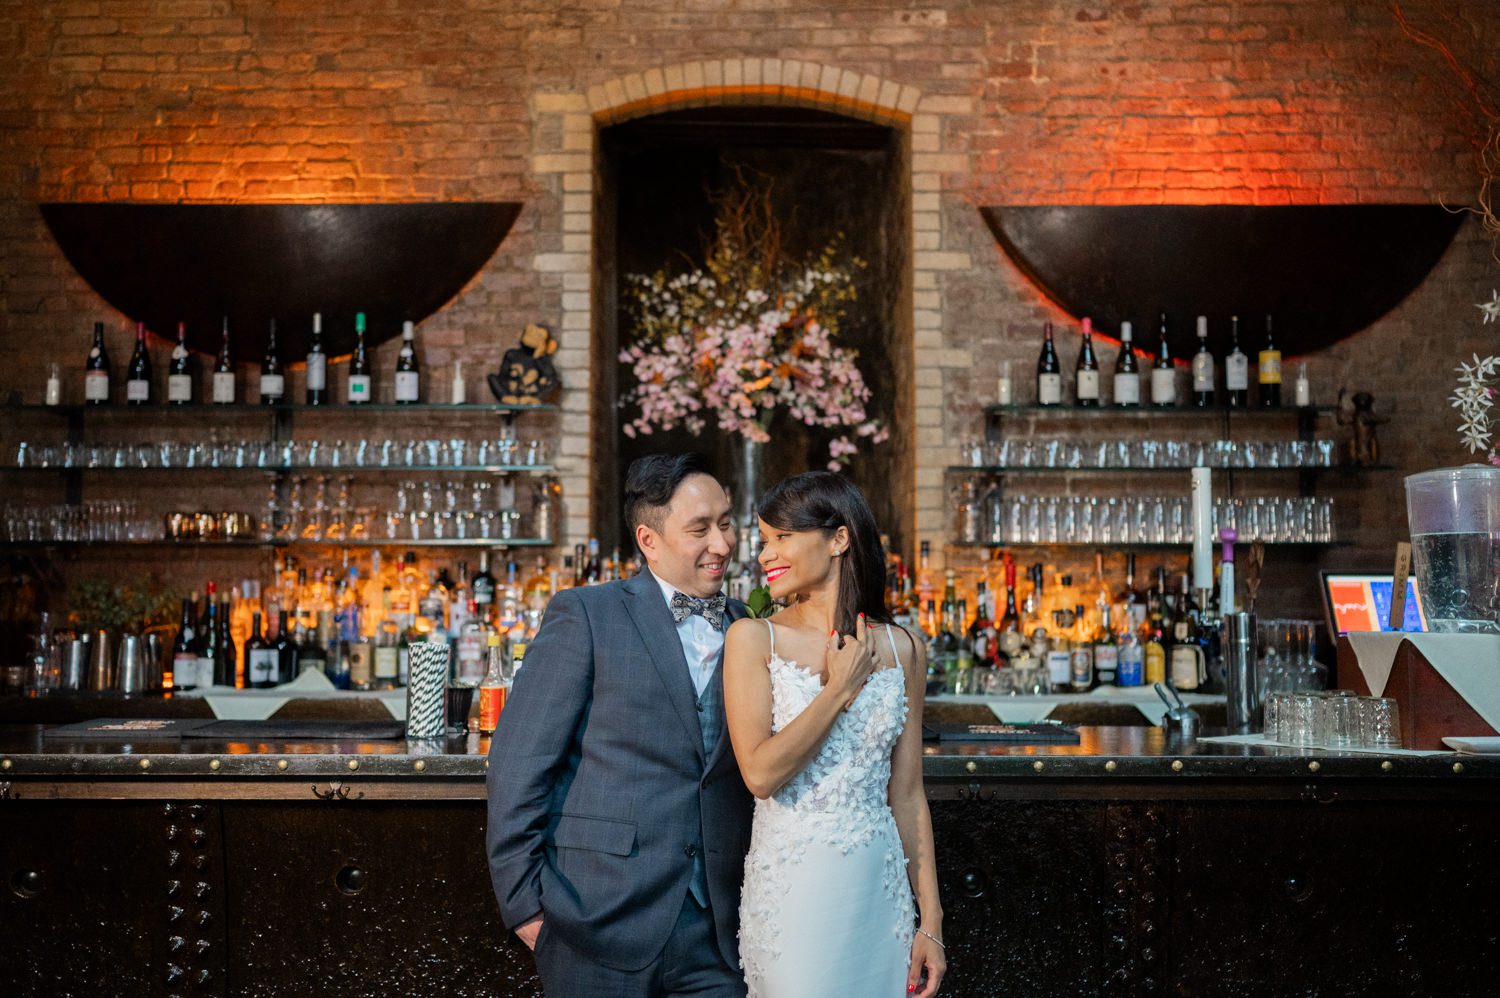 Every wedding is a story, a unique tale of love, joy, and the beginning of a new chapter. Recently, we had the privilege of photographing the beautiful union of Patricia and Michael at the enchanting My Moon in Brooklyn, NY.

My Moon, with its rustic charm and historic allure, provided the perfect backdrop for Patricia and Michael's celebration. Nestled in the heart of Brooklyn, this former boiler room turned chic restaurant exudes warmth and intimacy, making it an ideal setting for a romantic wedding affair. The exposed brick walls, twinkle lights, and cozy ambiance set the stage for a night to remember.

One of the most heartwarming aspects of Patricia and Michael's wedding was the love that surrounded them. From the laughter-filled speech that turned emotional bringing tear to Michael's eyes. It was clear that they were surrounded by an incredible support system of family and friends. The love and joy shared by everyone present truly made the day unforgettable.

Patricia and Michael My Moon Brooklyn NY wedding photographed by Miles from Pearl Paper Studio. Pearl Paper Studio is here to capture real emotions, fun couples with non-traditional wedding stories, now we are booking small intimate backyard wedding, outdoor tent wedding, farm wedding, elopements, nyc elopements. We are currently booking 2024 weddings in NJ, NY, Brooklyn and Long Island.